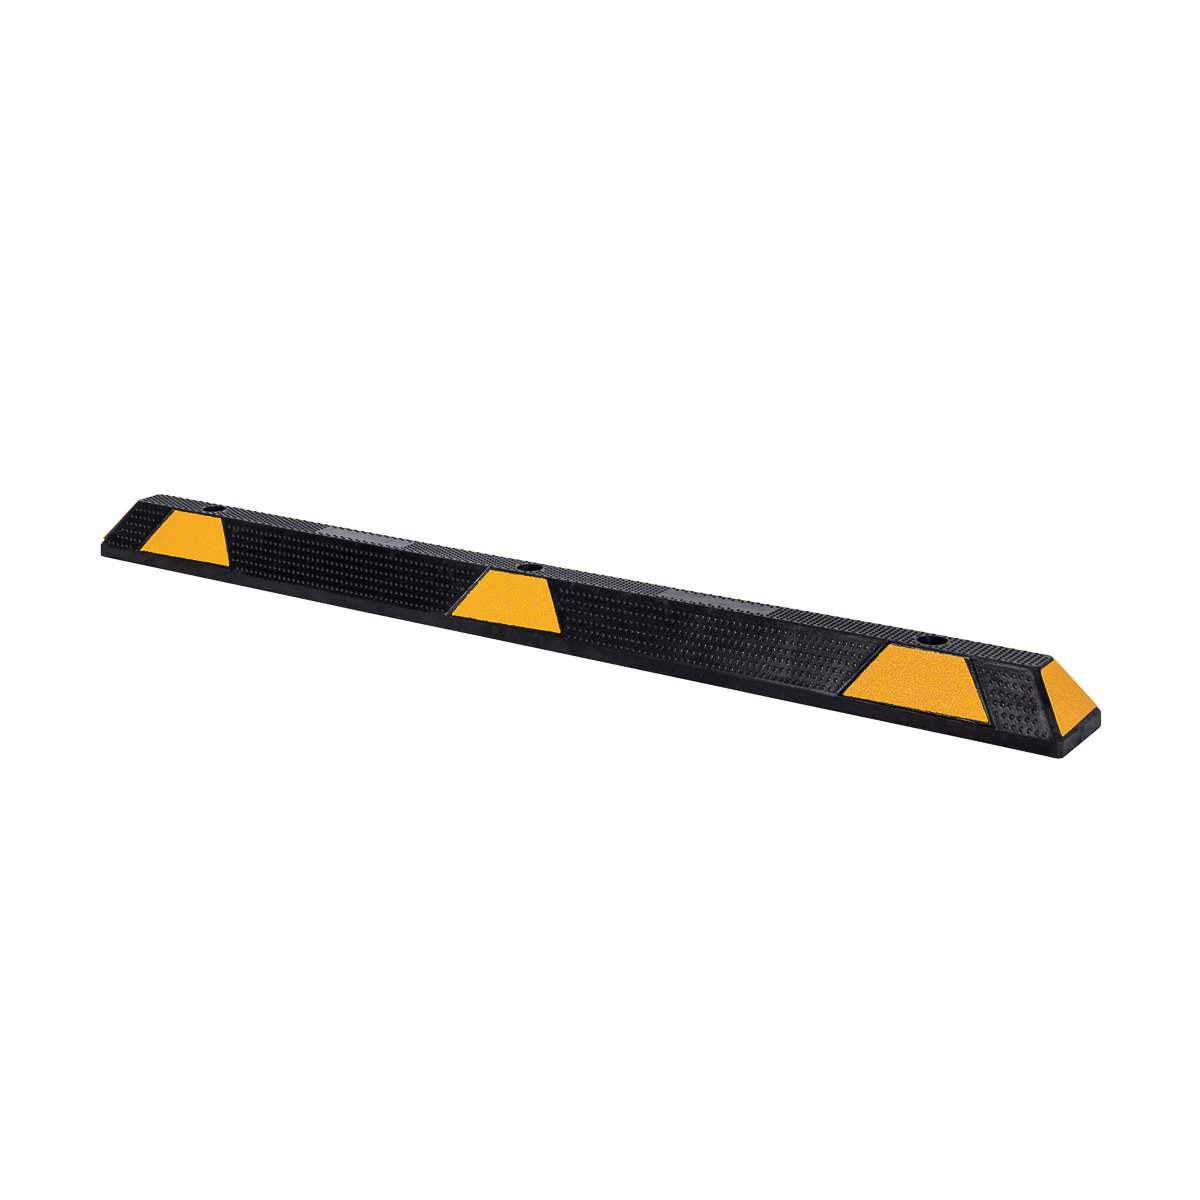 Heavy Duty Rubber Wheel Stop 1650mm | Black and Yellow |